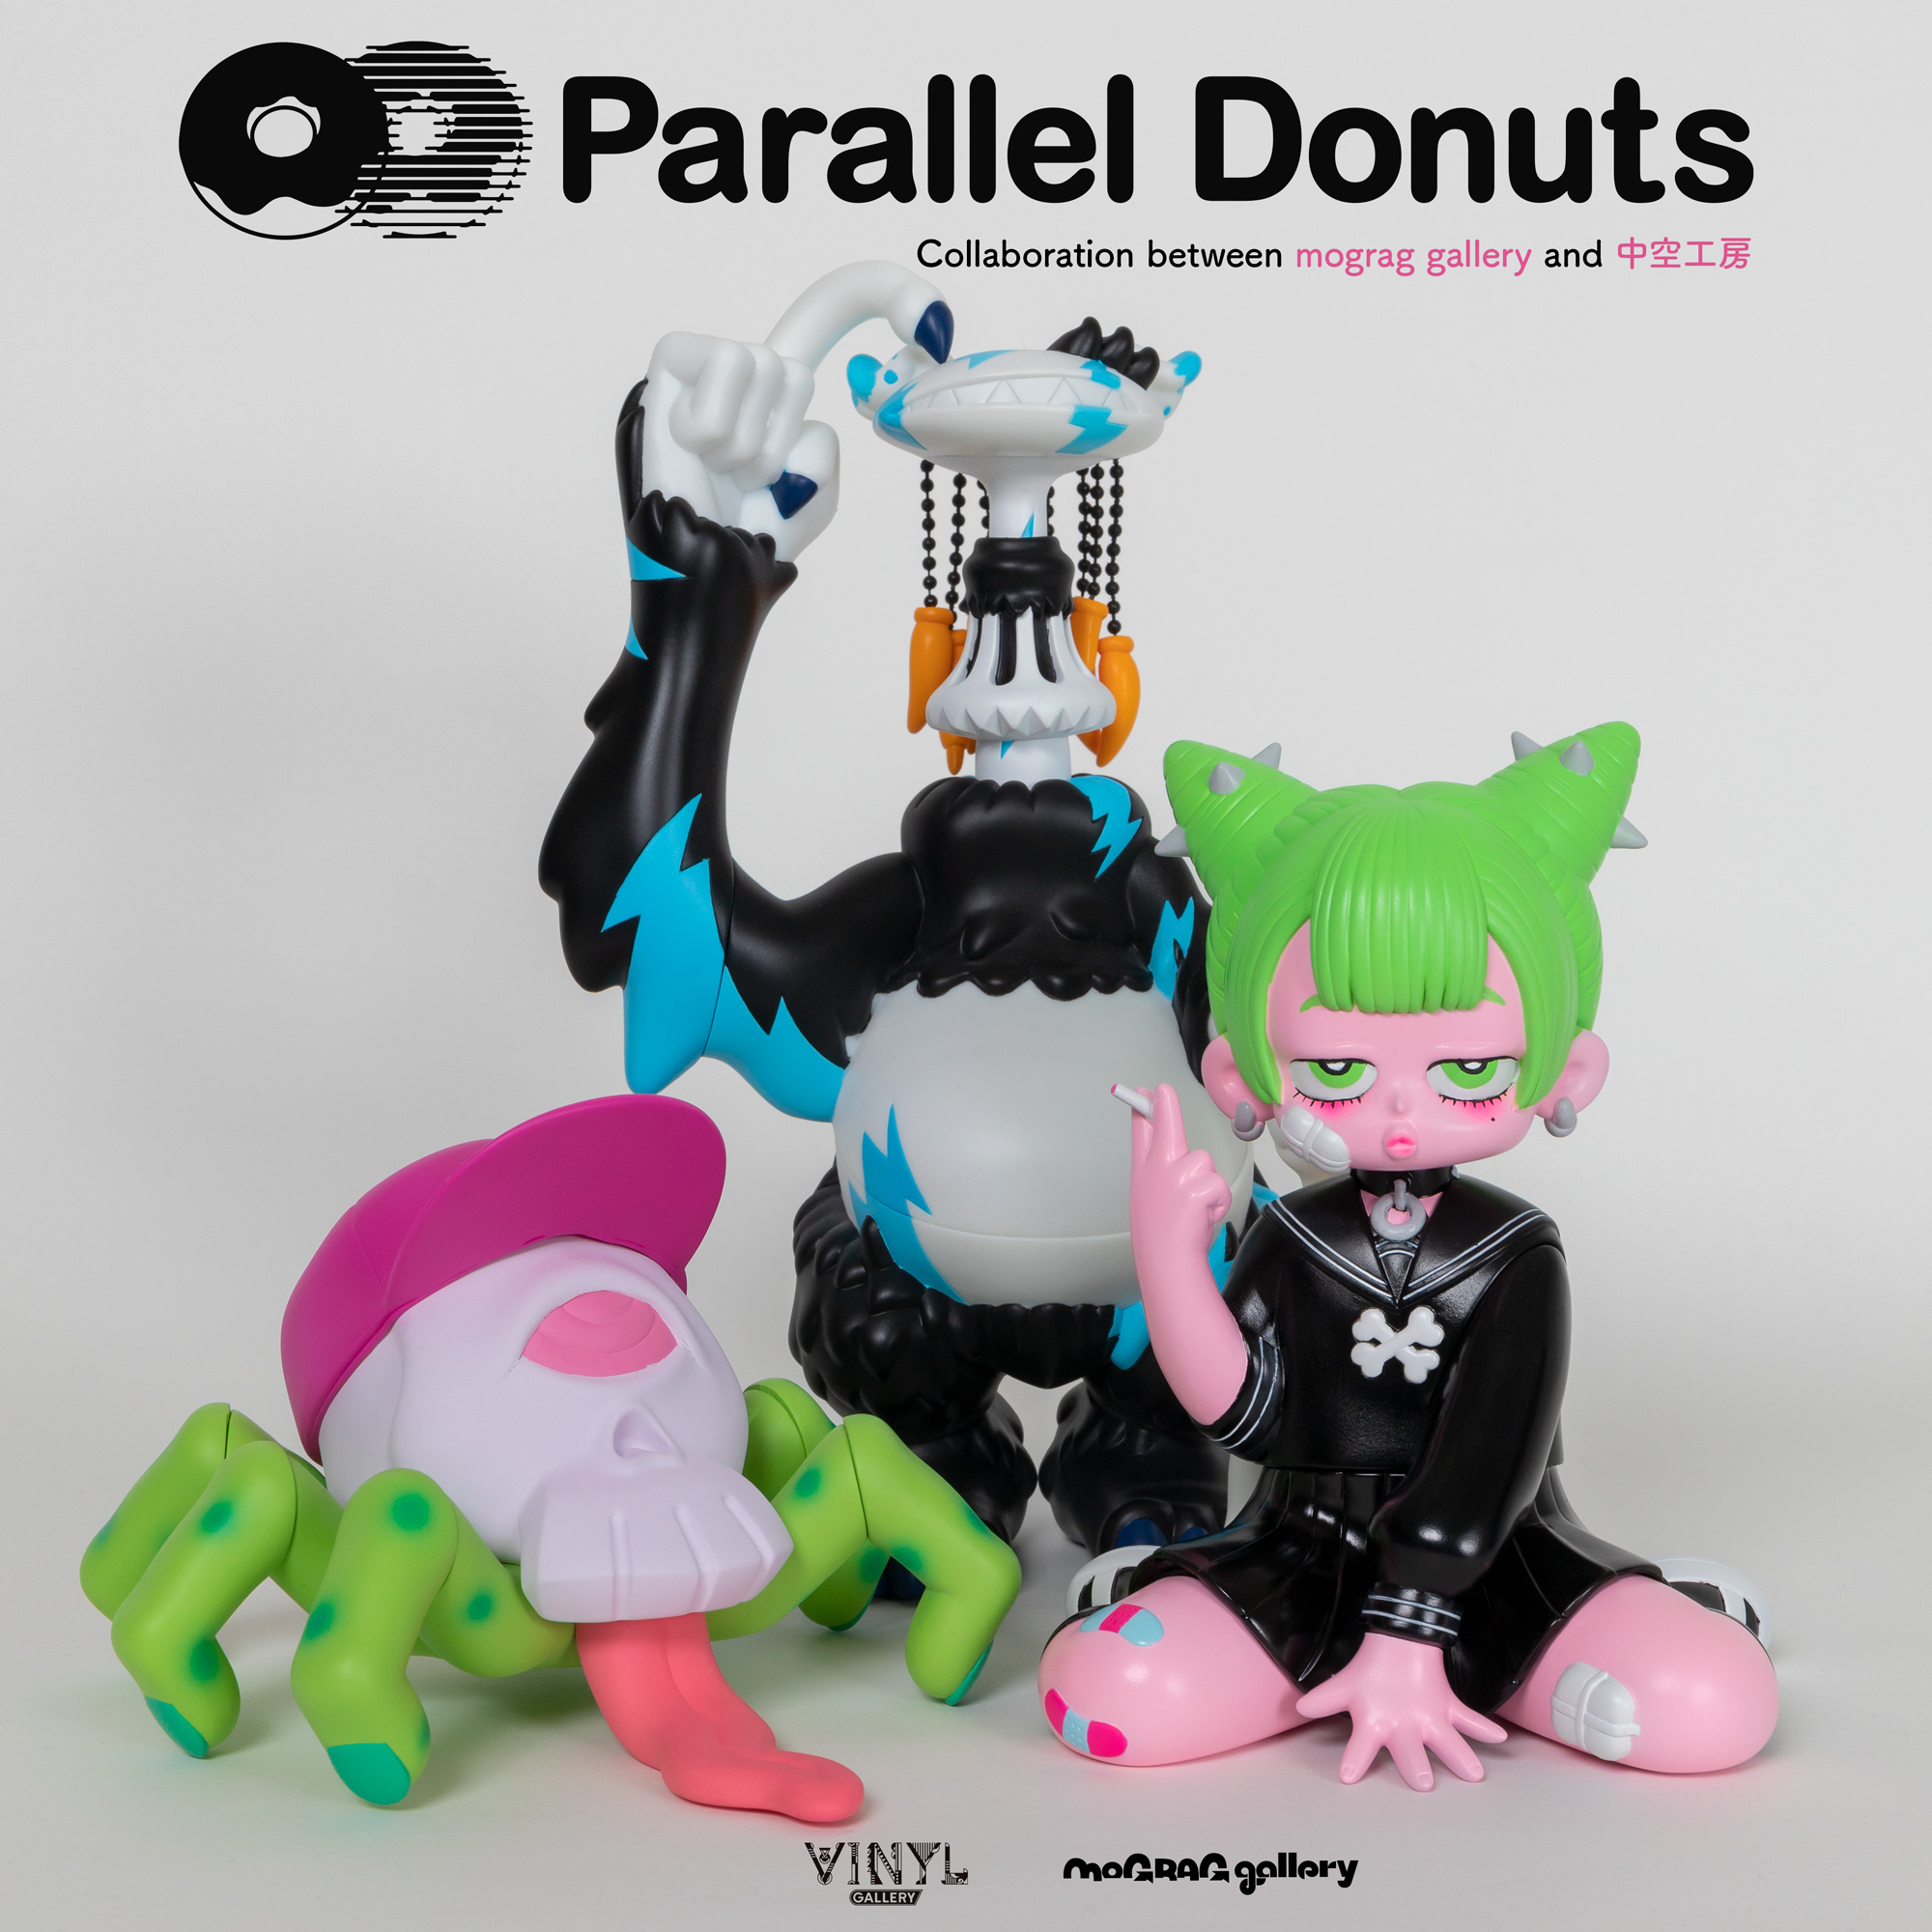 Parallel Donuts